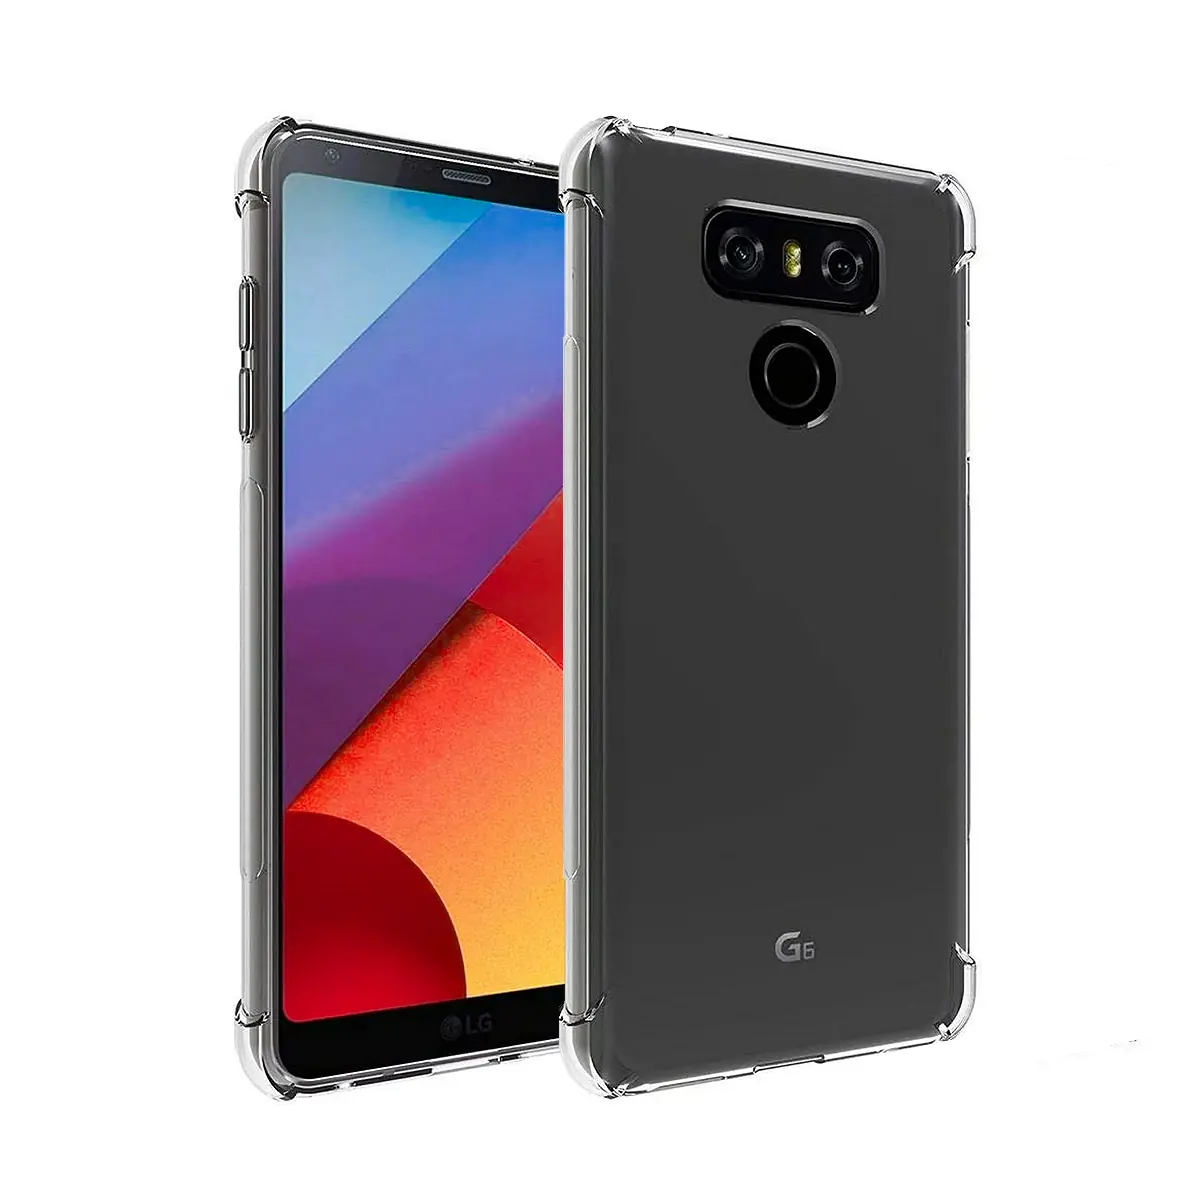 LG G6/Q6/G7 Plus/Q7 Plus Clear Silicone Shockproof Phone Case with Corner Rubber Bumpers